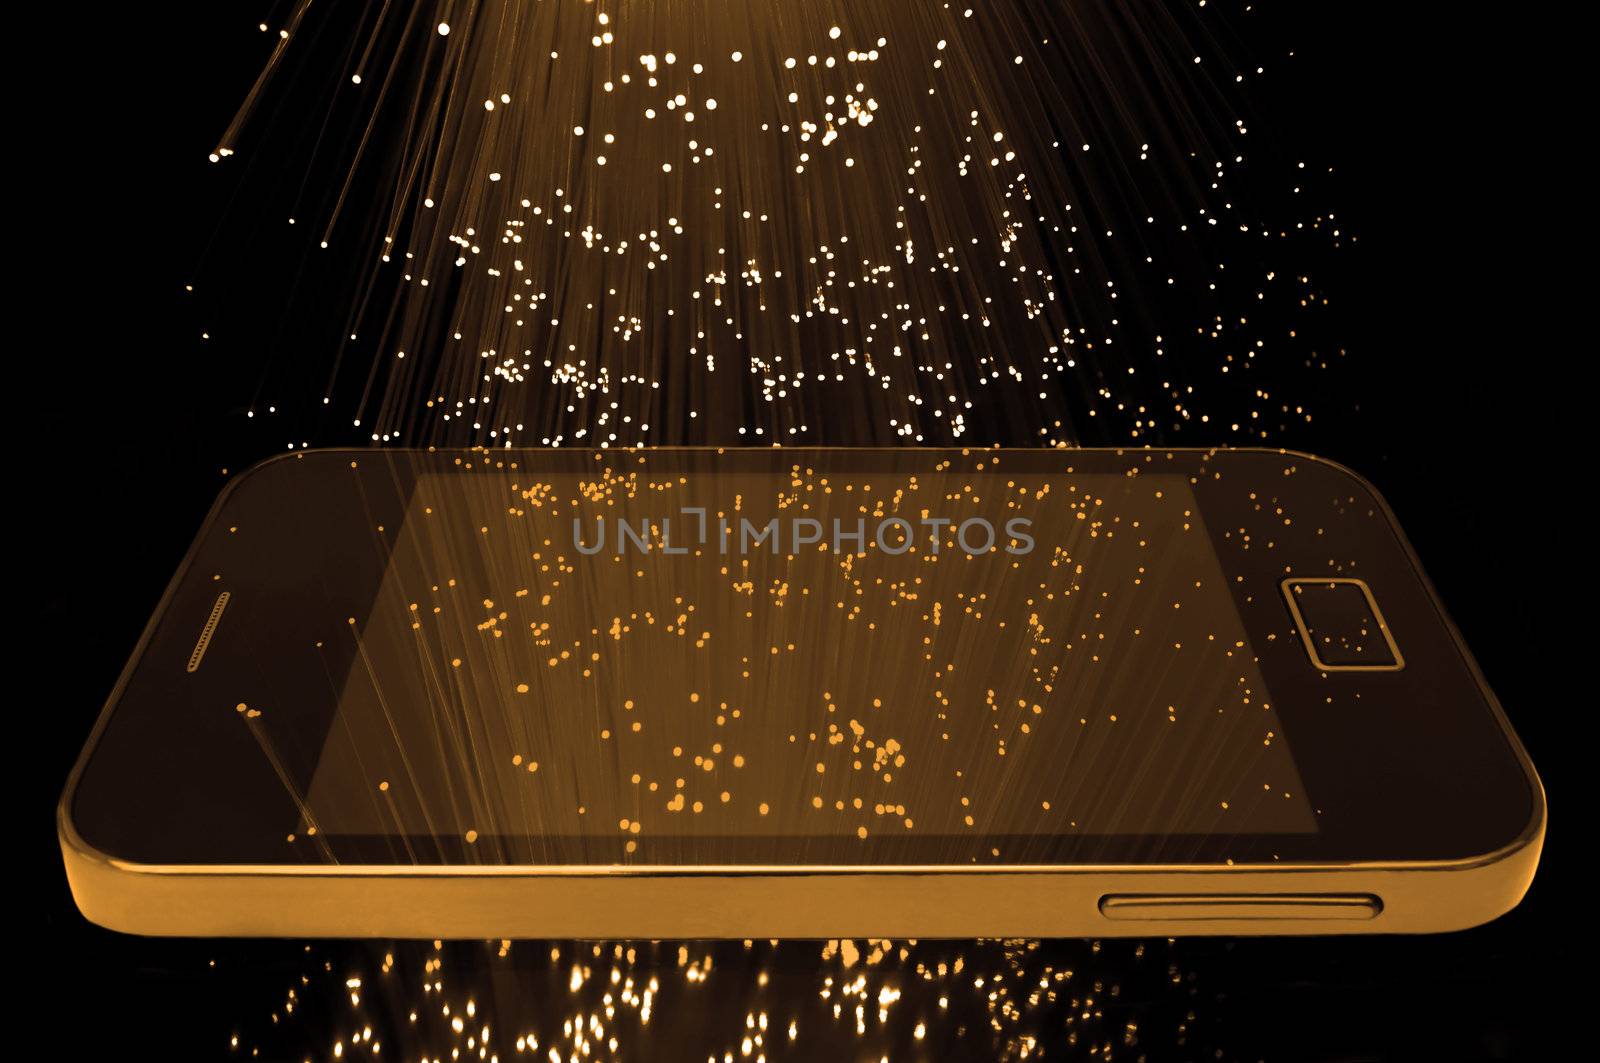 Many illuminated golden fiber optic light strands cascading down against a black background and reflecting on the screen of a smart phone in the foreground